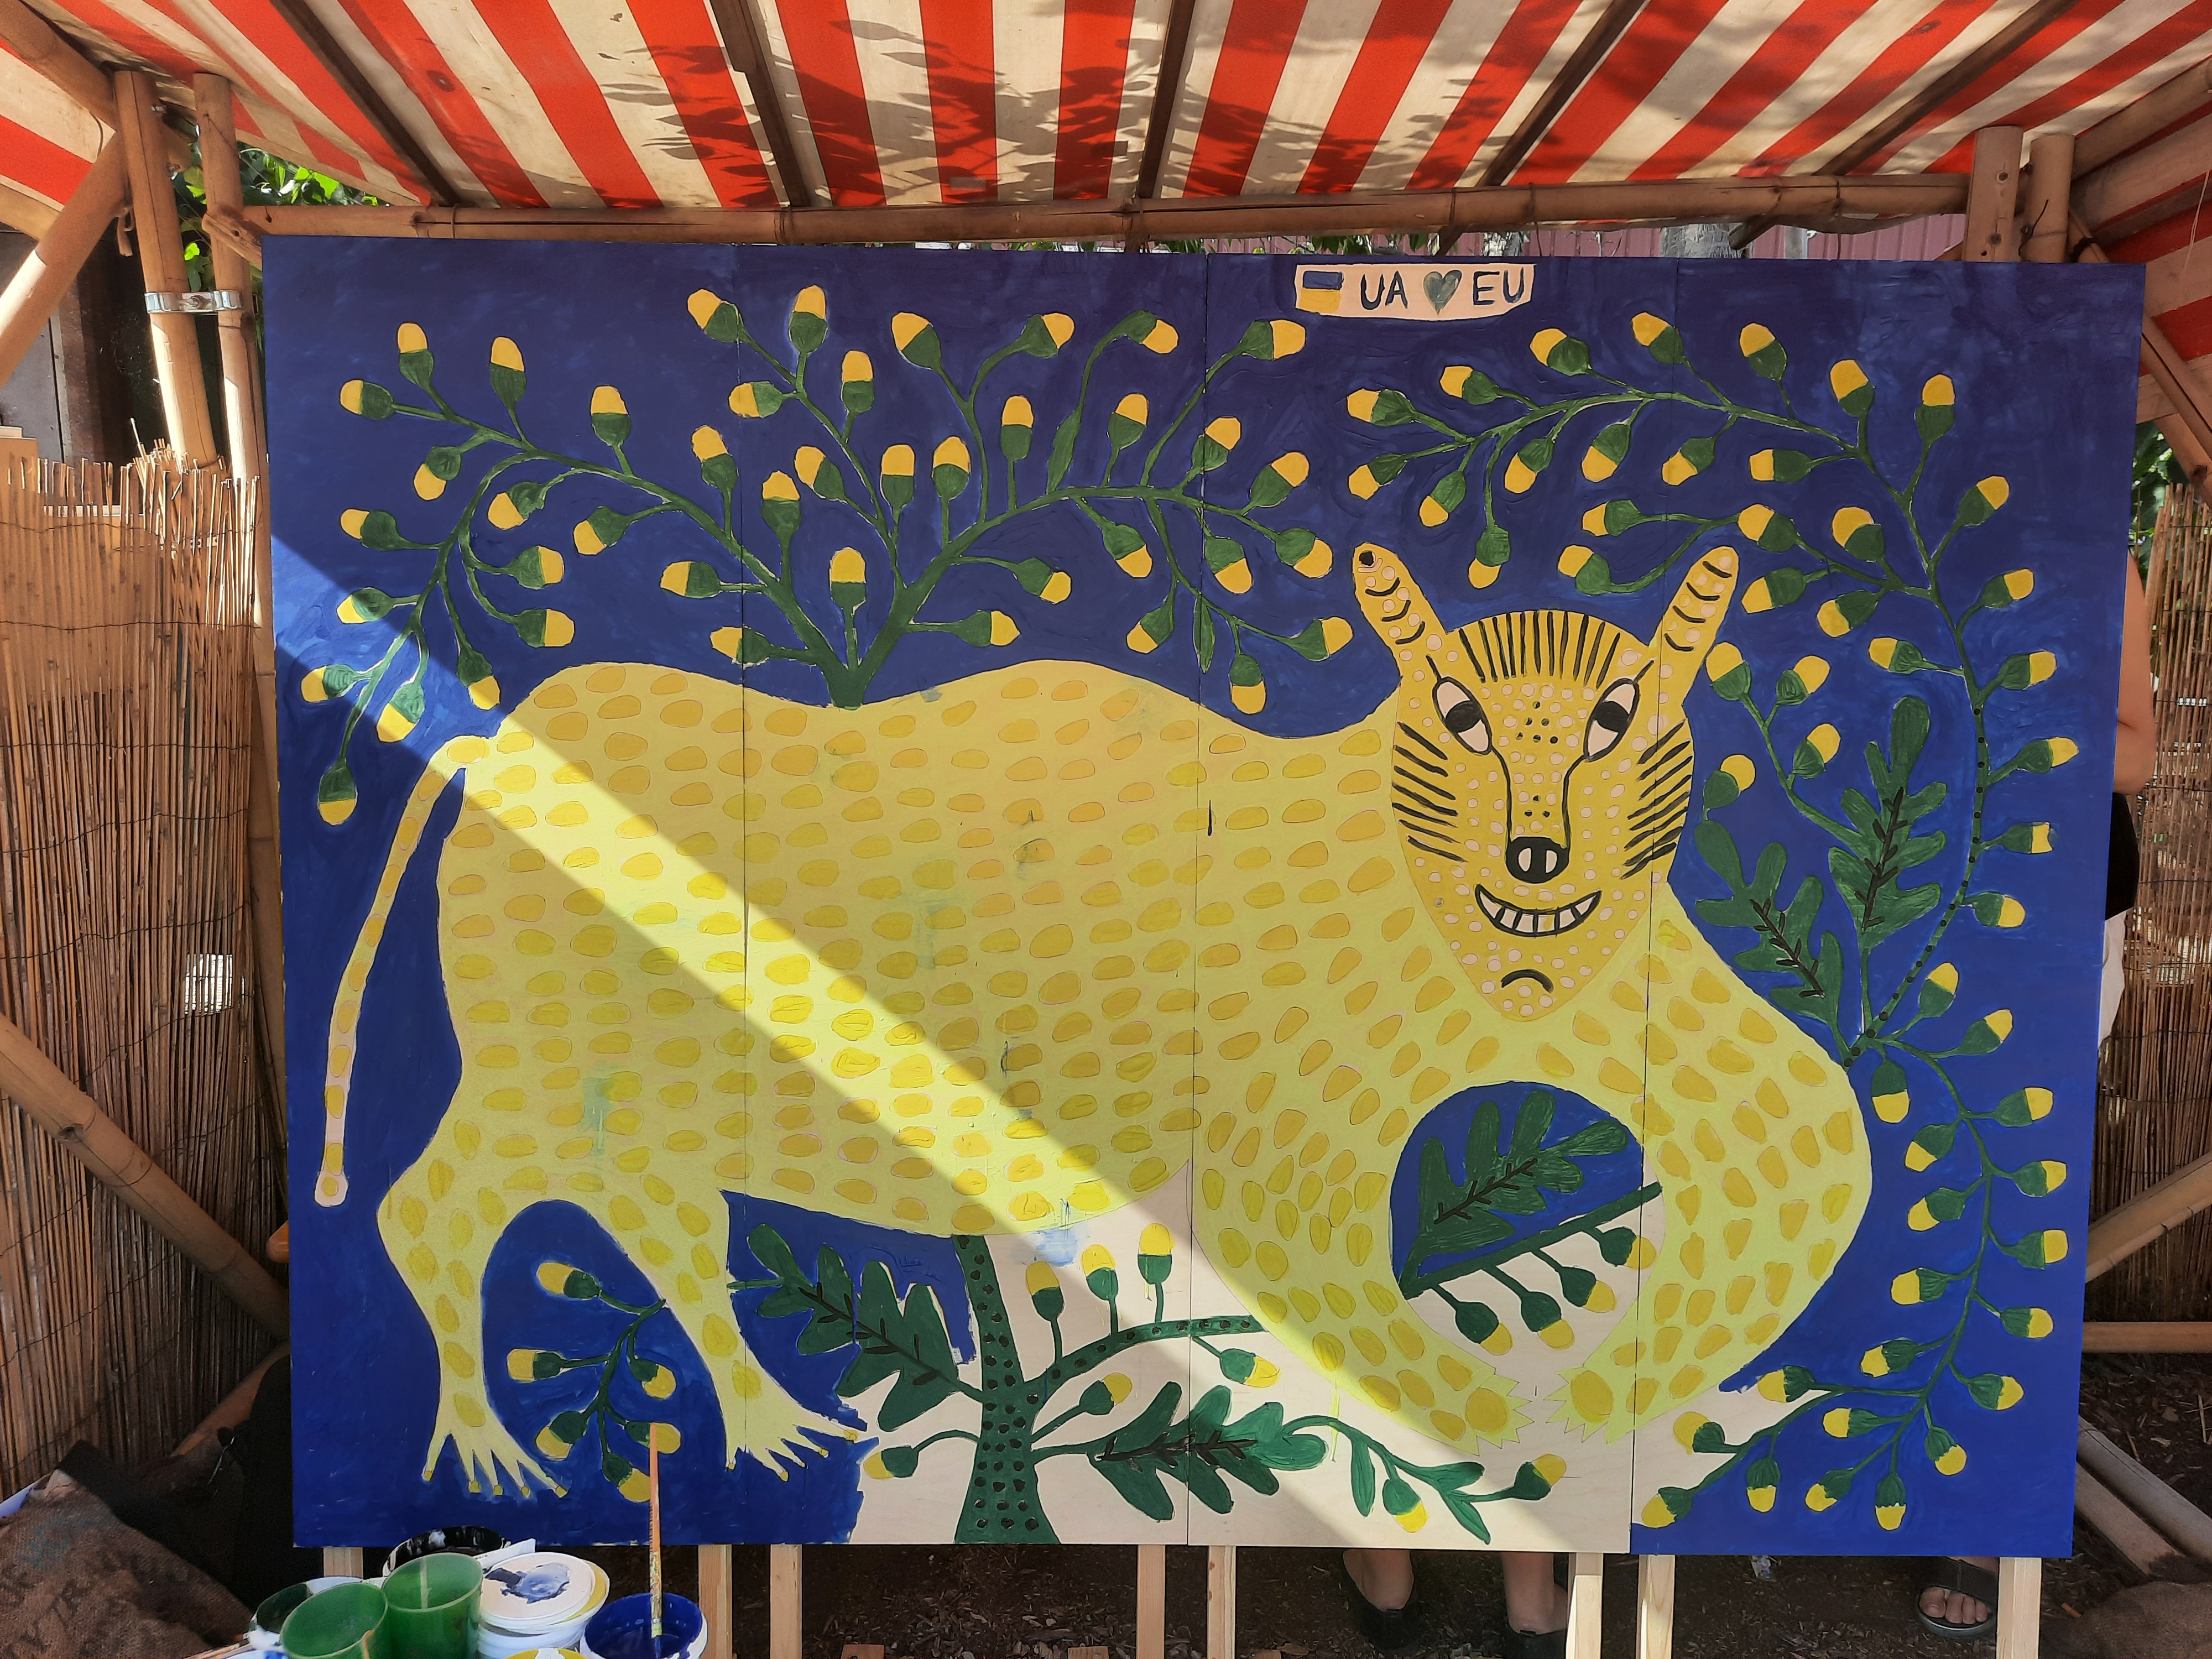 Collaborative painting in the United for Ukraine stand at the URBACT City Festival